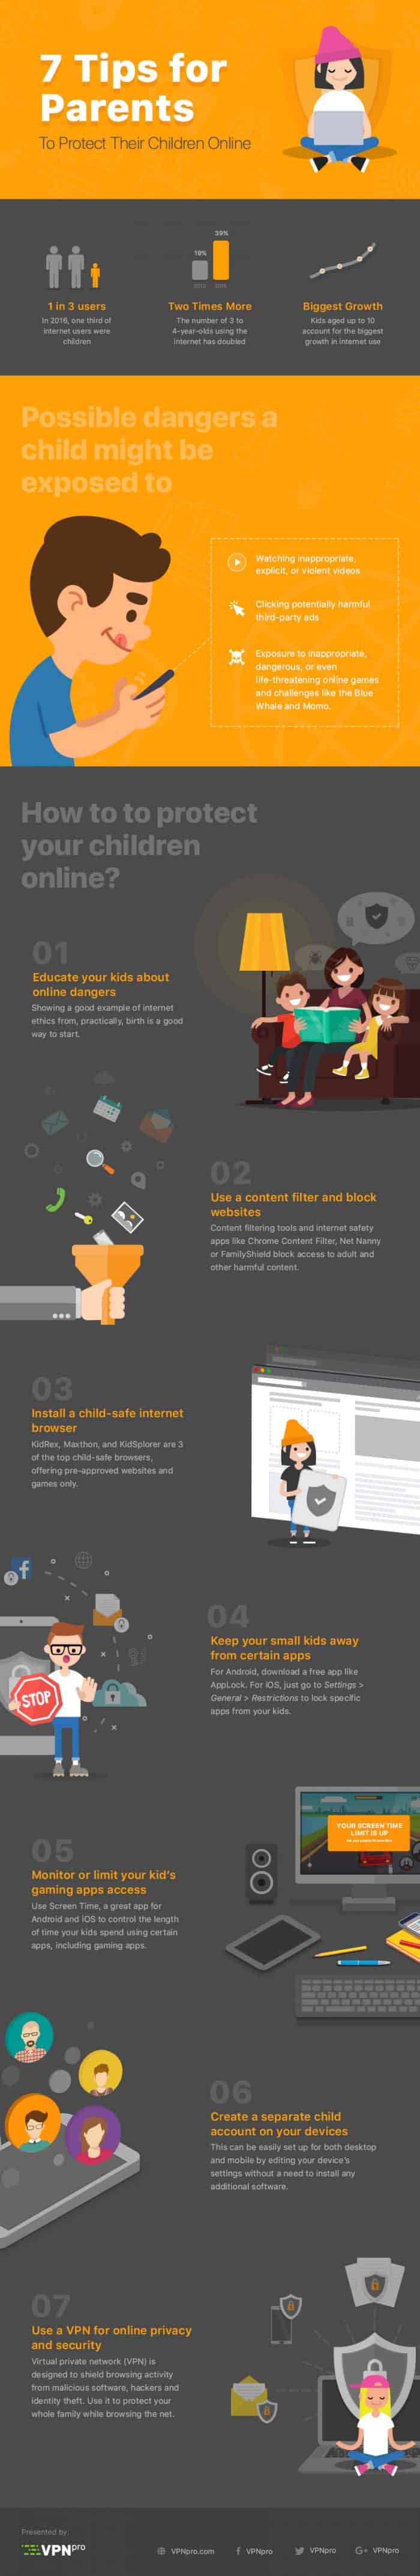 7 Ways To Protect Kids Online - Daily Infographic